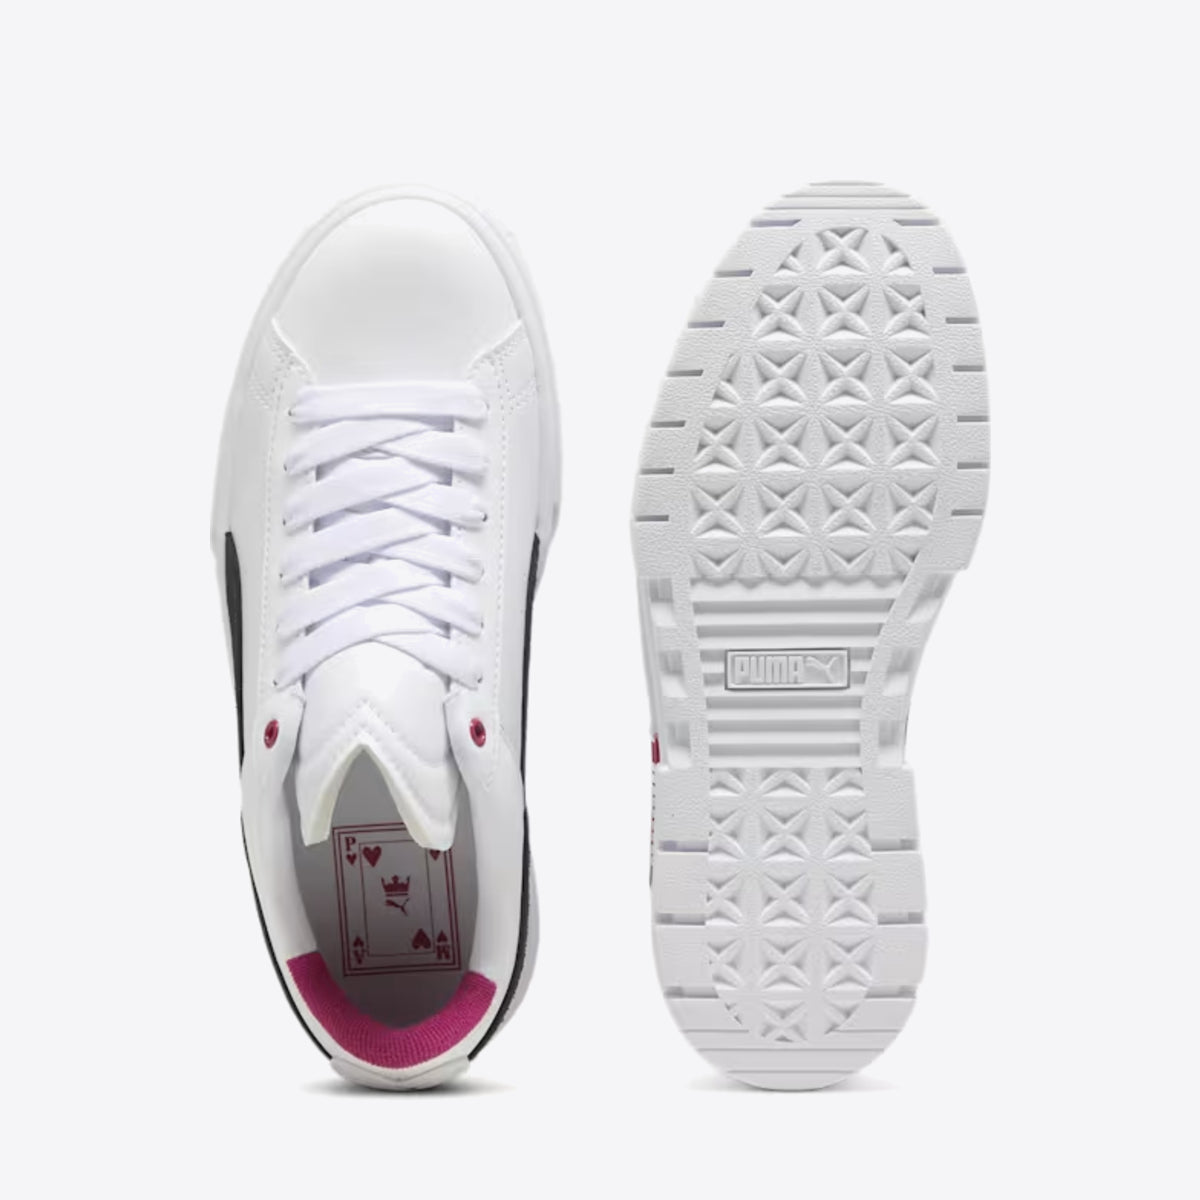 PUMA Mayze Queen of Hearts White/Black/Pink - Image 7